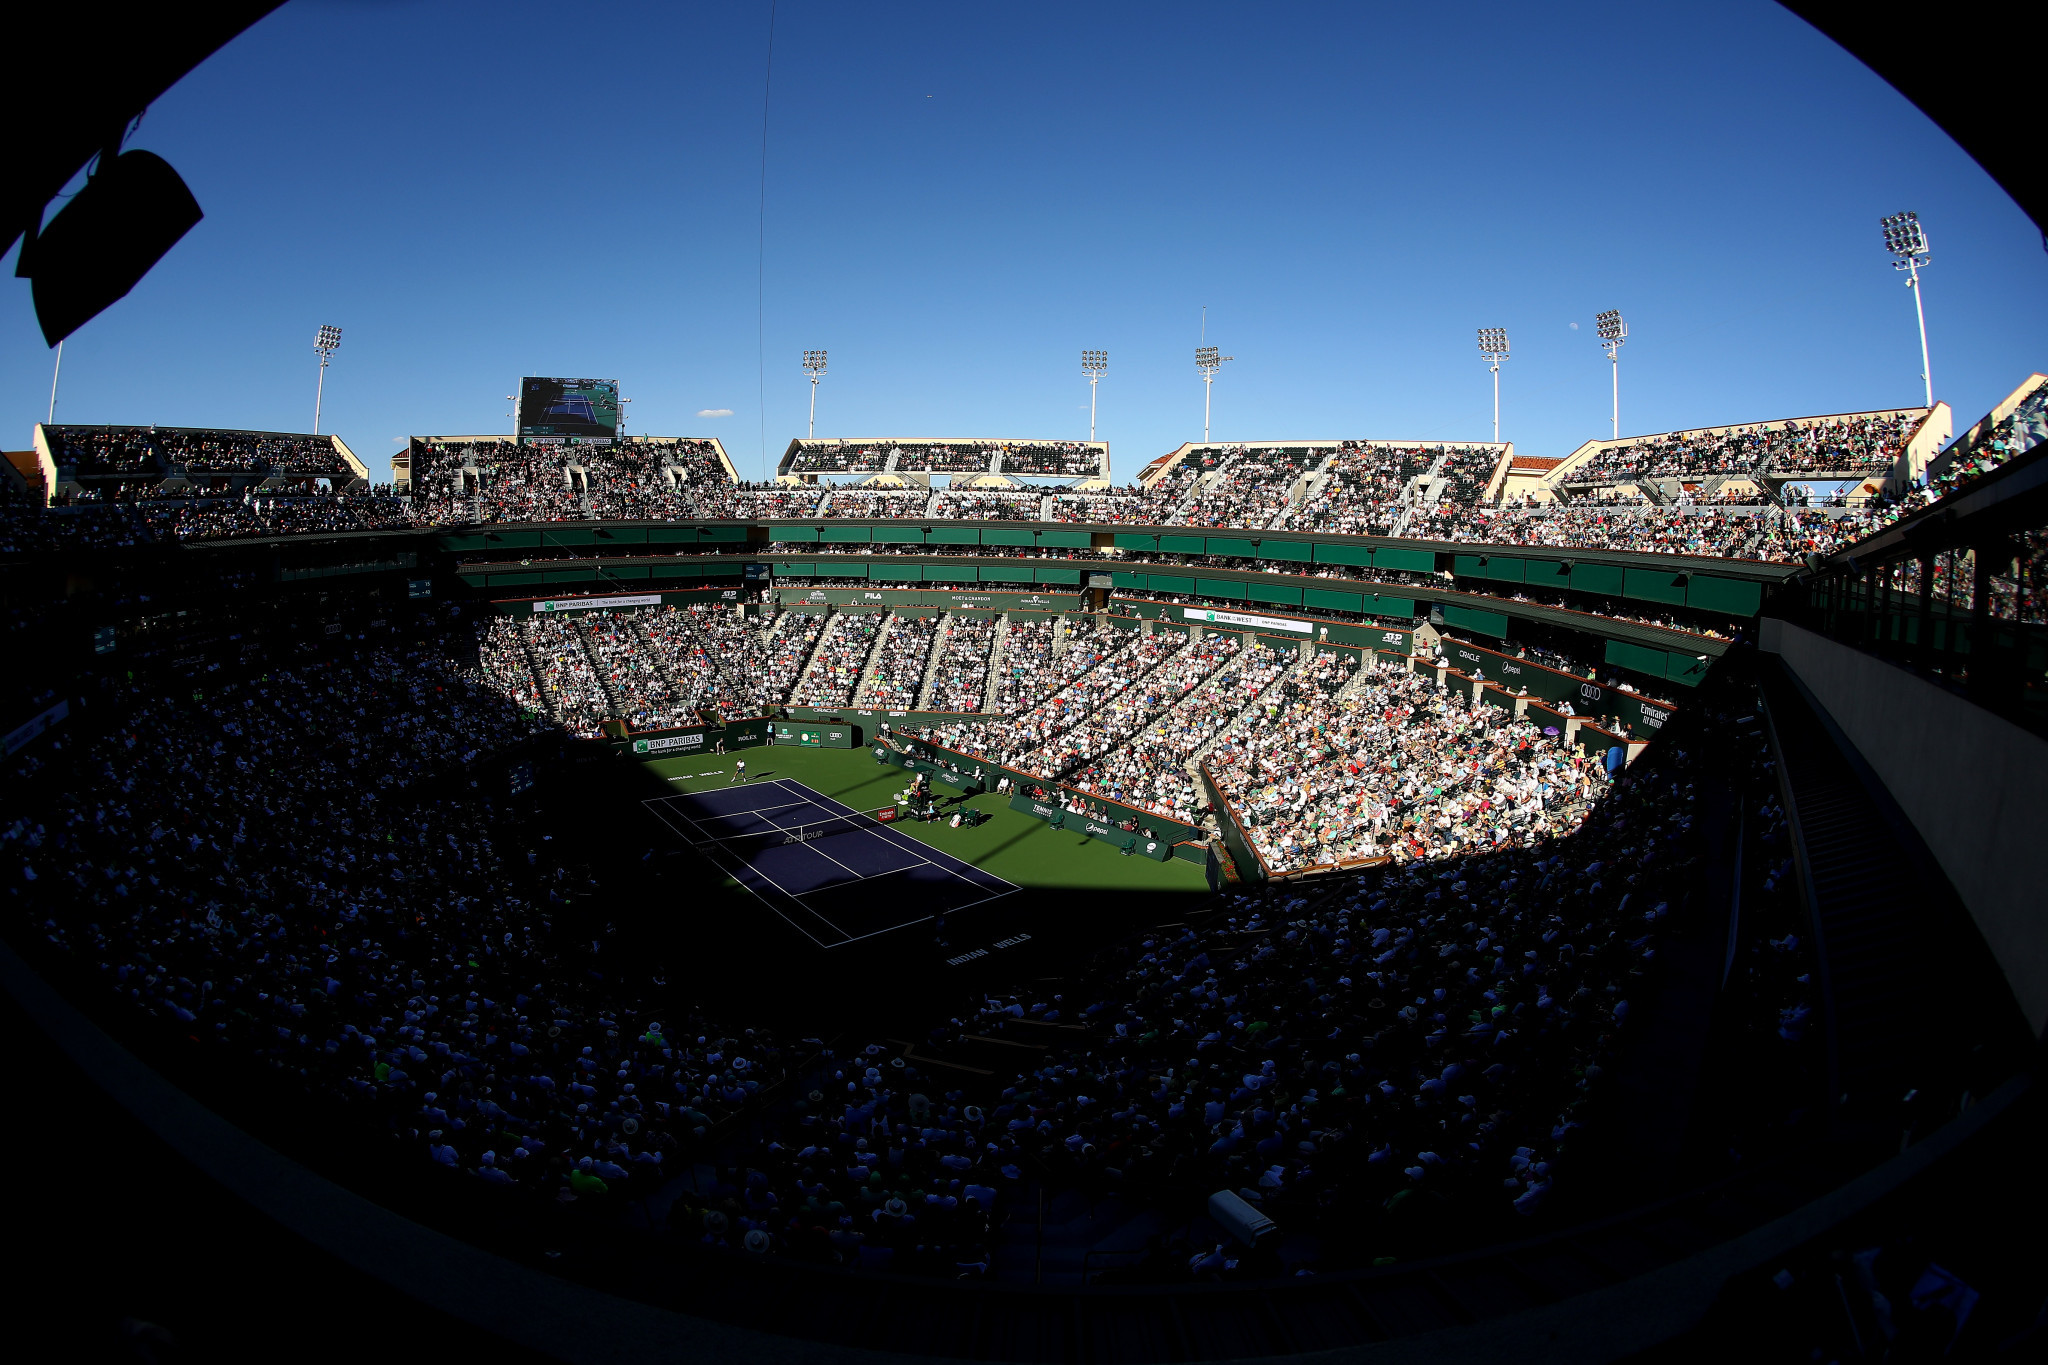 The BNP Paribas Open in Indian Wells is among the upcoming events where precautionary health measures will be implemented on-site ©Getty Images